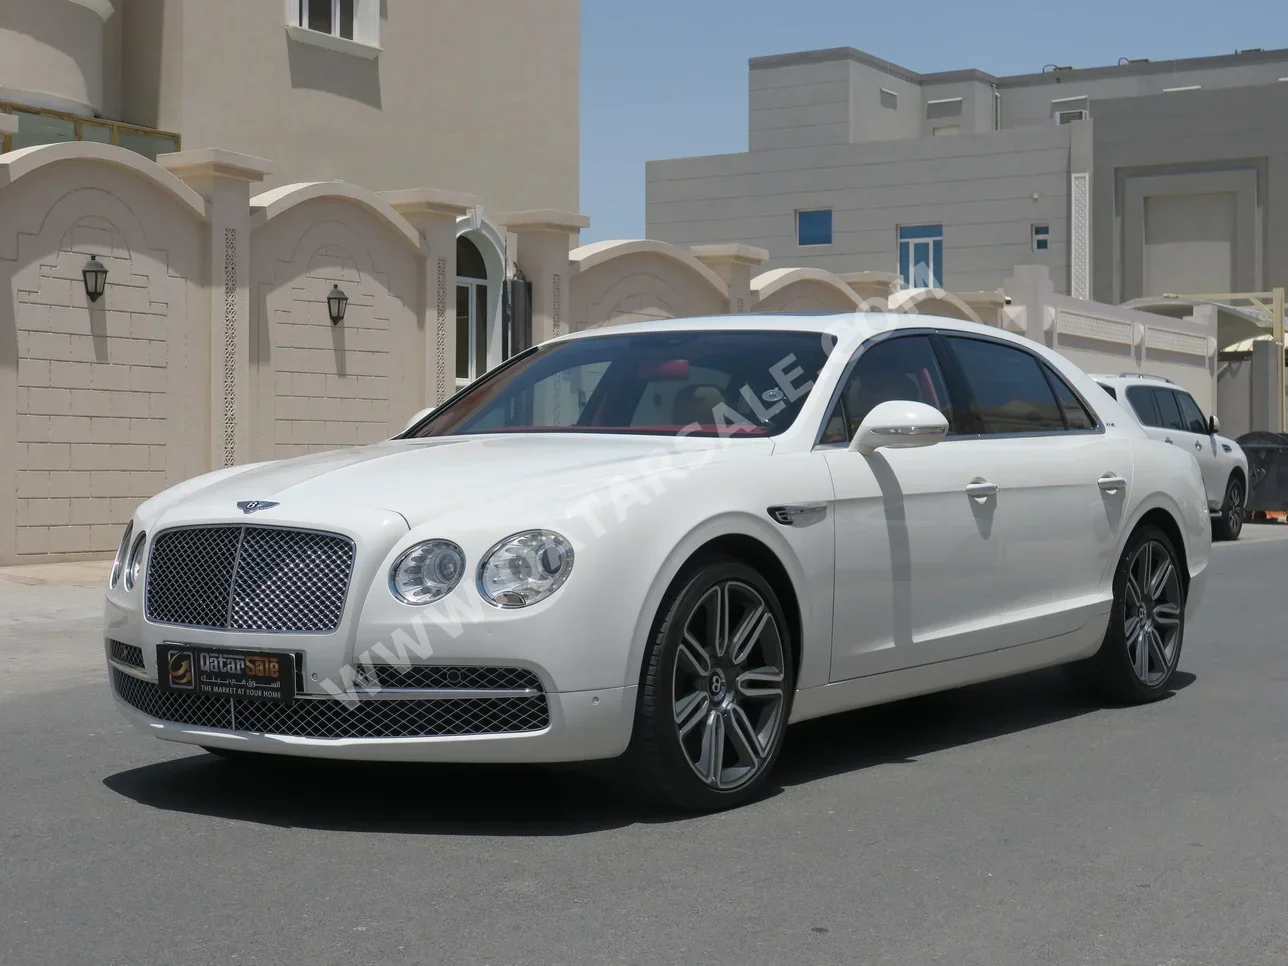 Bentley  Continental  Flying Spur  2016  Automatic  76,000 Km  12 Cylinder  All Wheel Drive (AWD)  Sedan  White